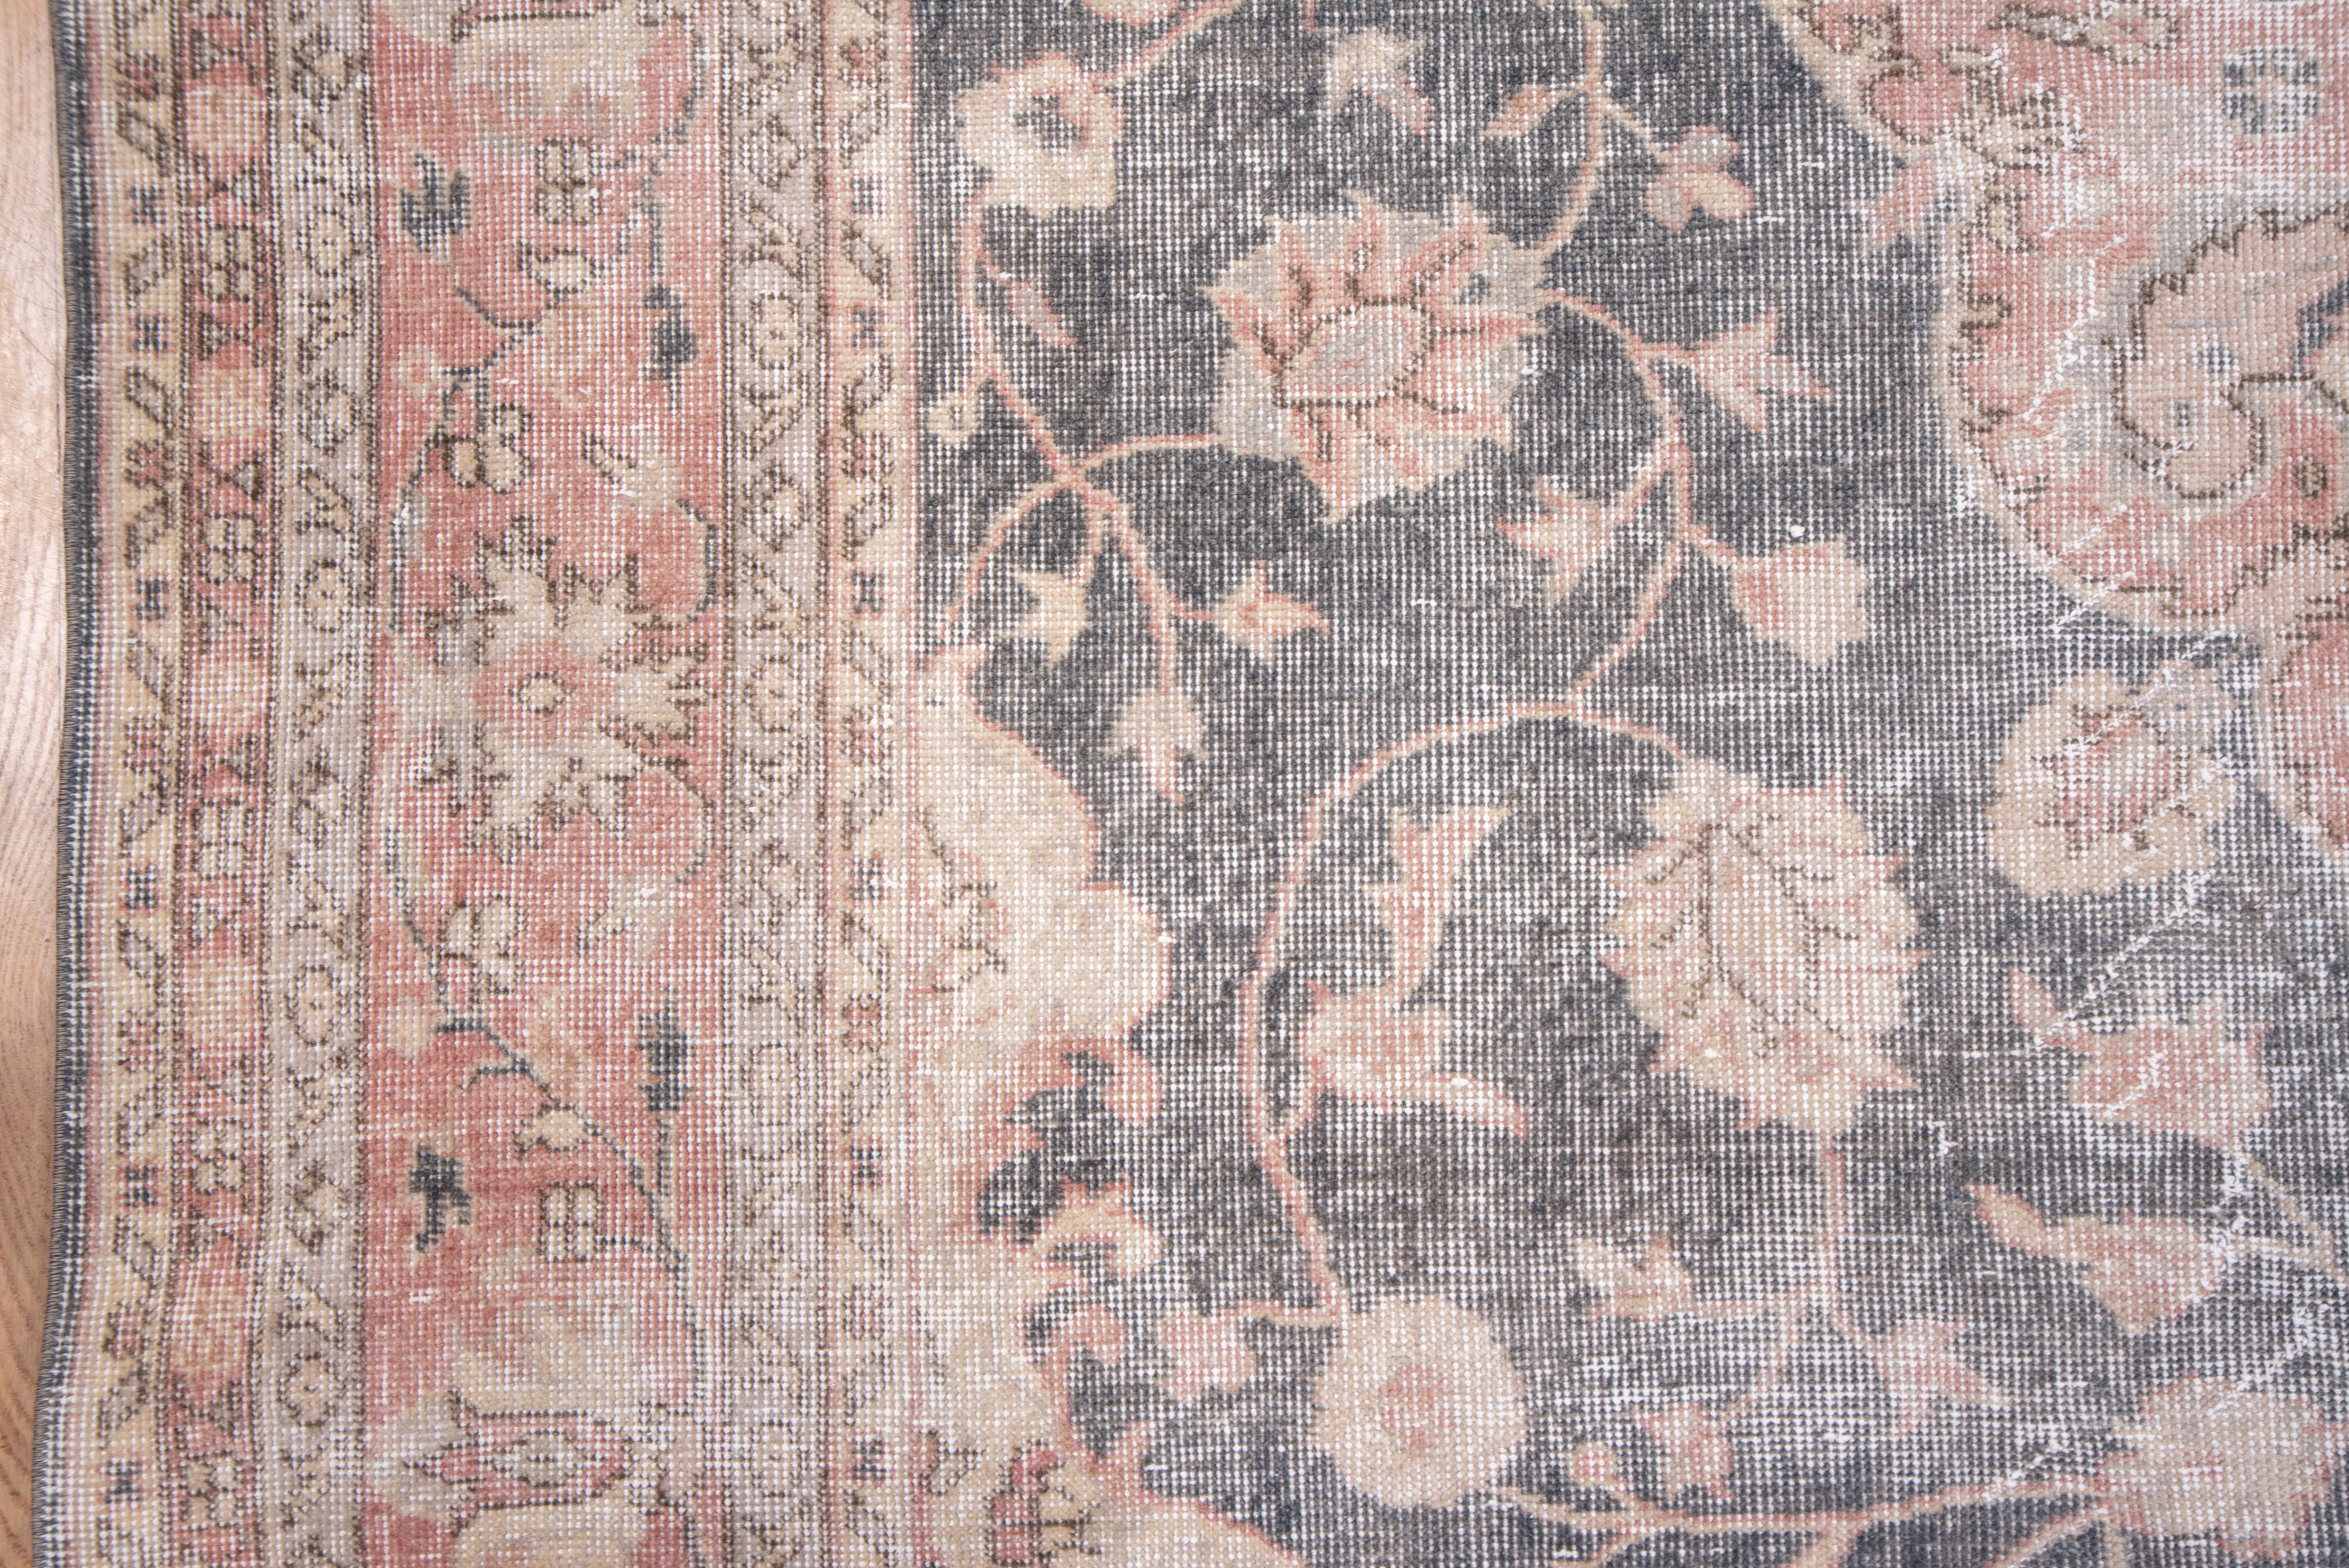 Wool Lightly Distressed Oushak Carpet, Shabby Chic Style, Gray Field, Pink Border